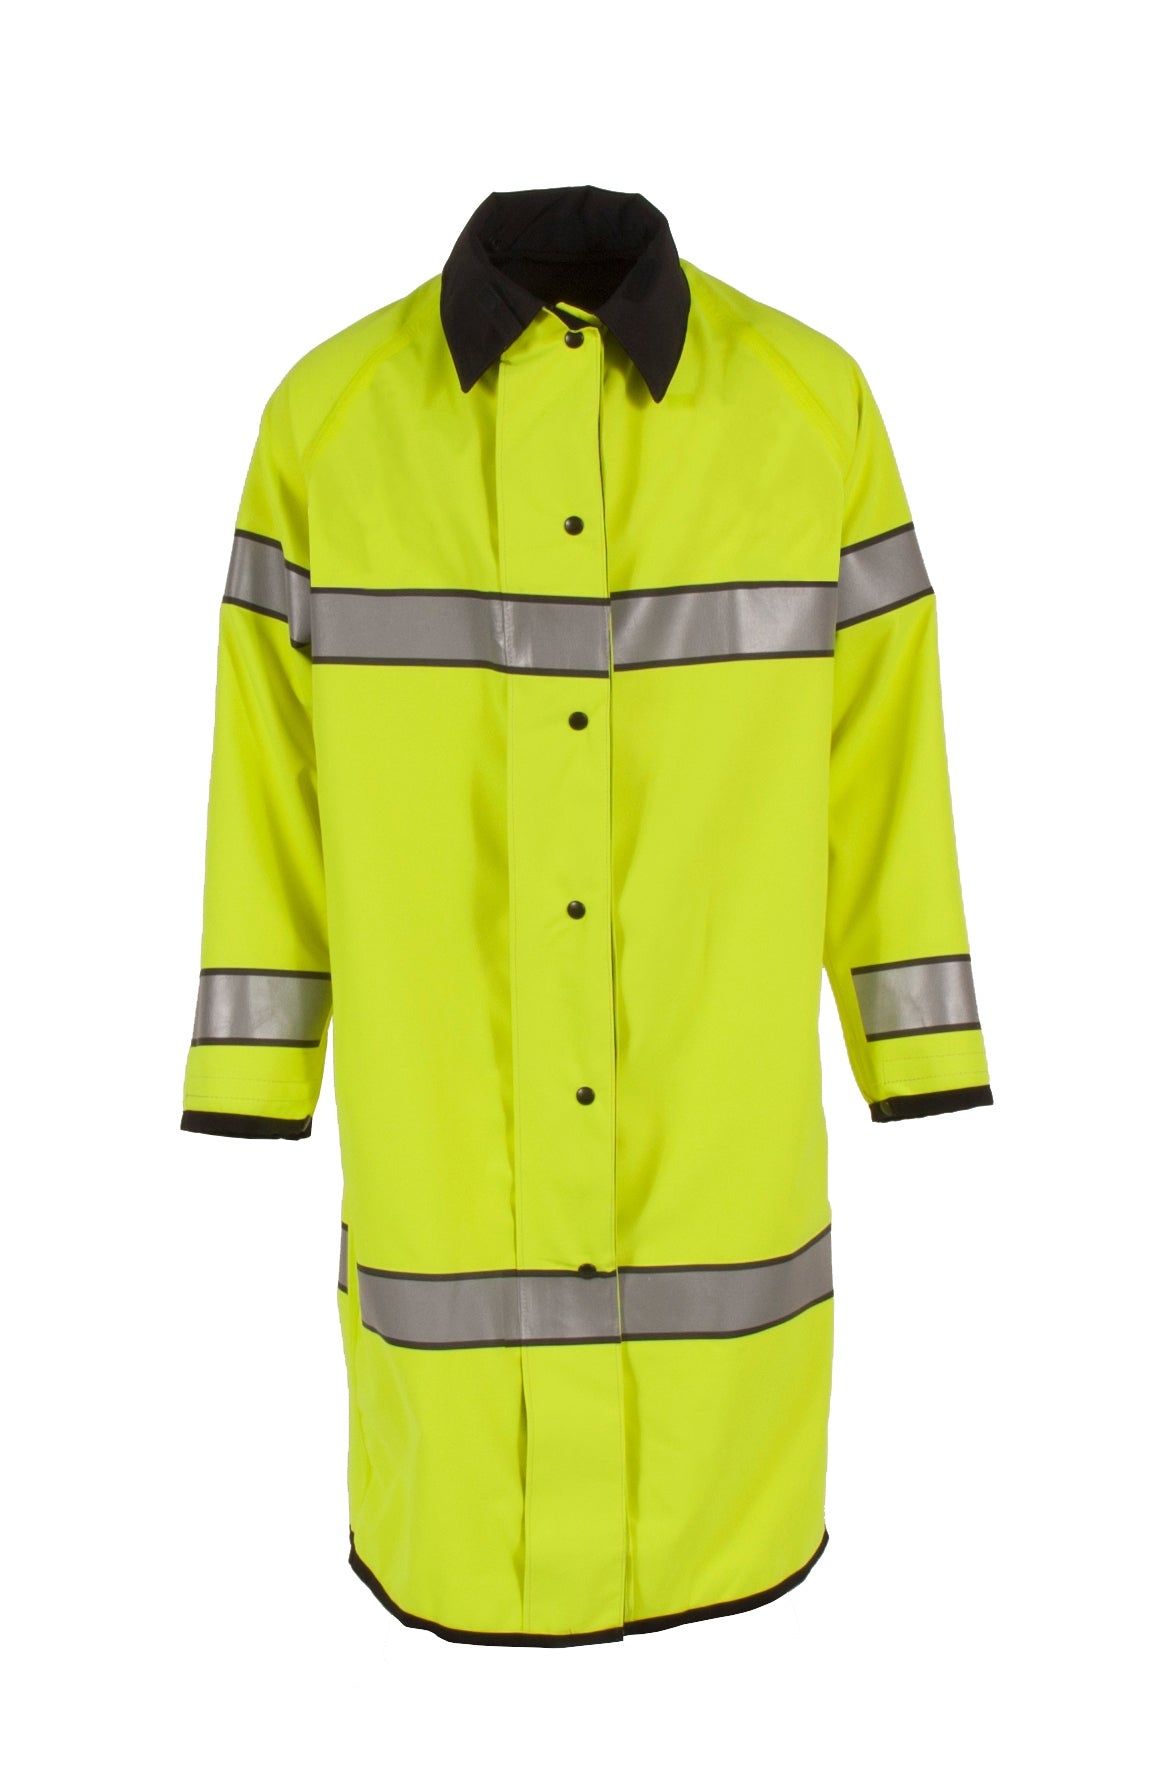 Radians 5010RCH3M Reversible Police Coat with 3M Reflective Taping